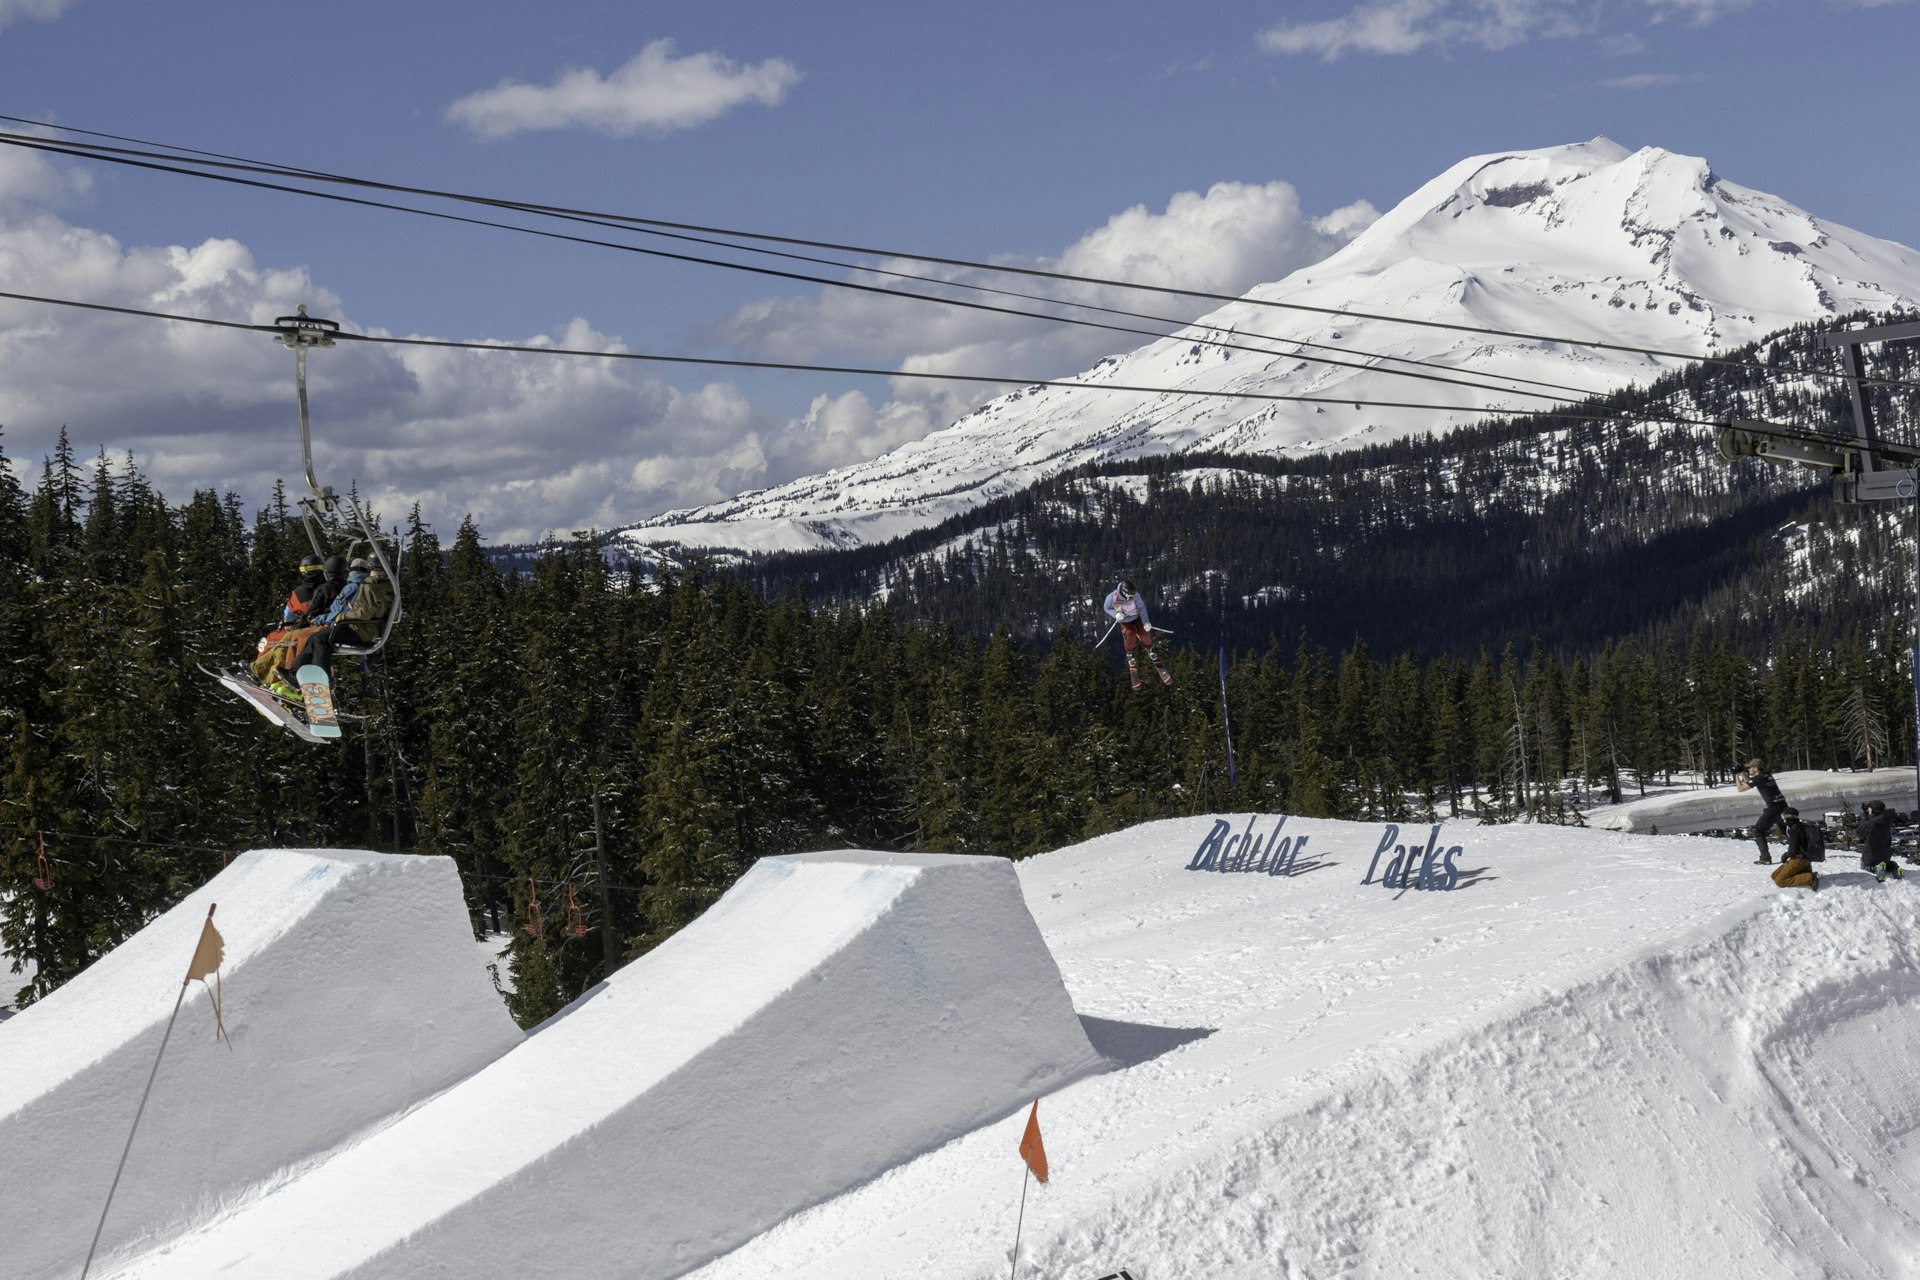 Skiers on chair lift take in big air Ski jumper at Mount Bachelor in Oregon